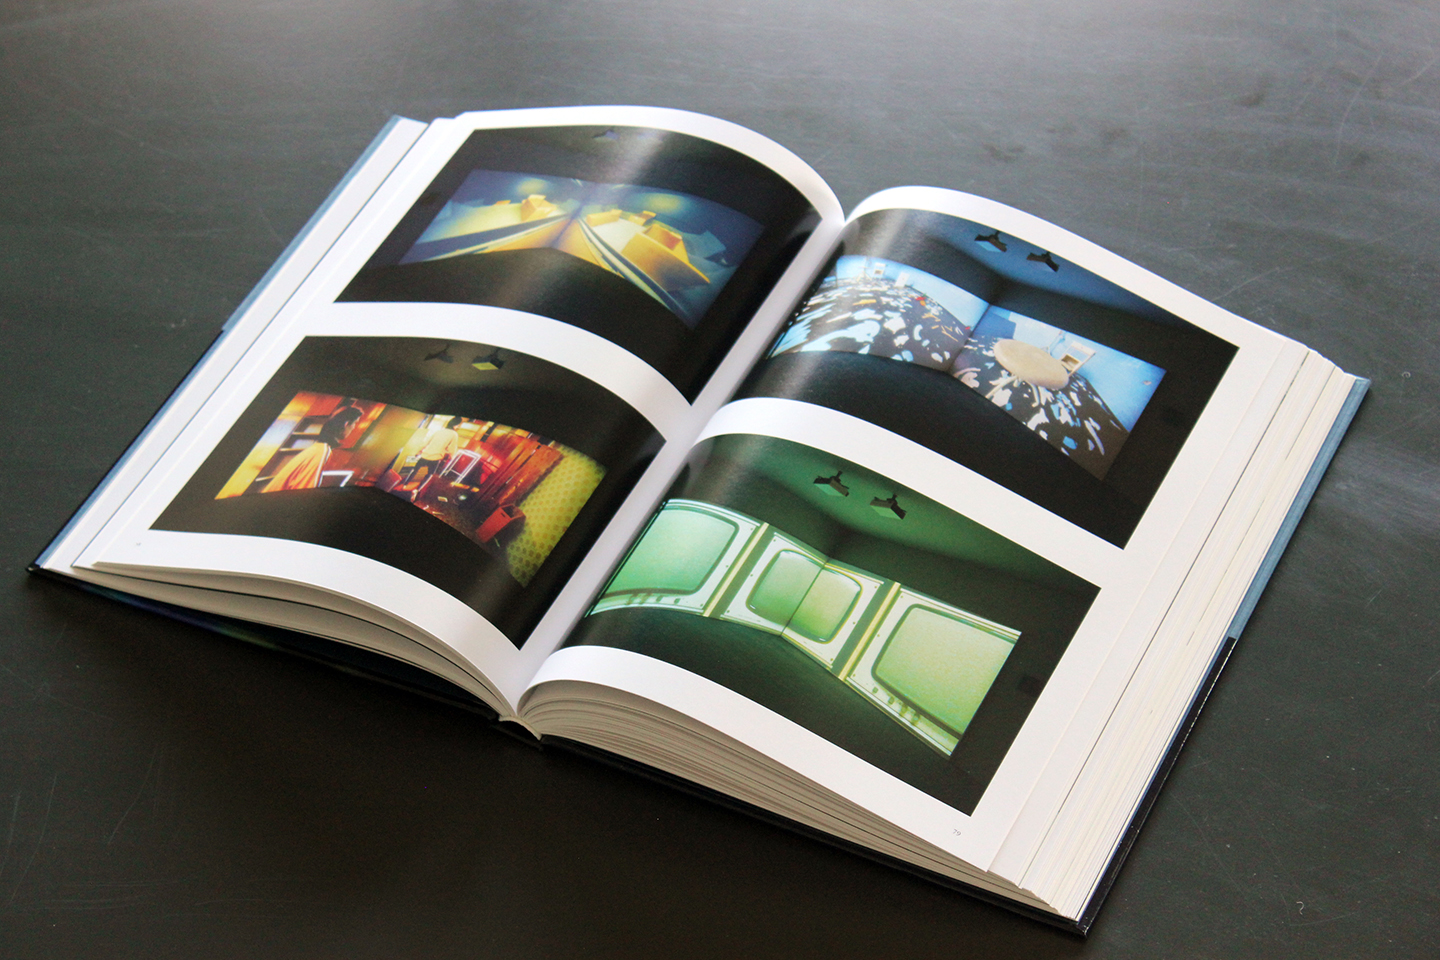 Interior spread of The Human Condition, showing installation views from Jane and Louise Wilson's Stasi City